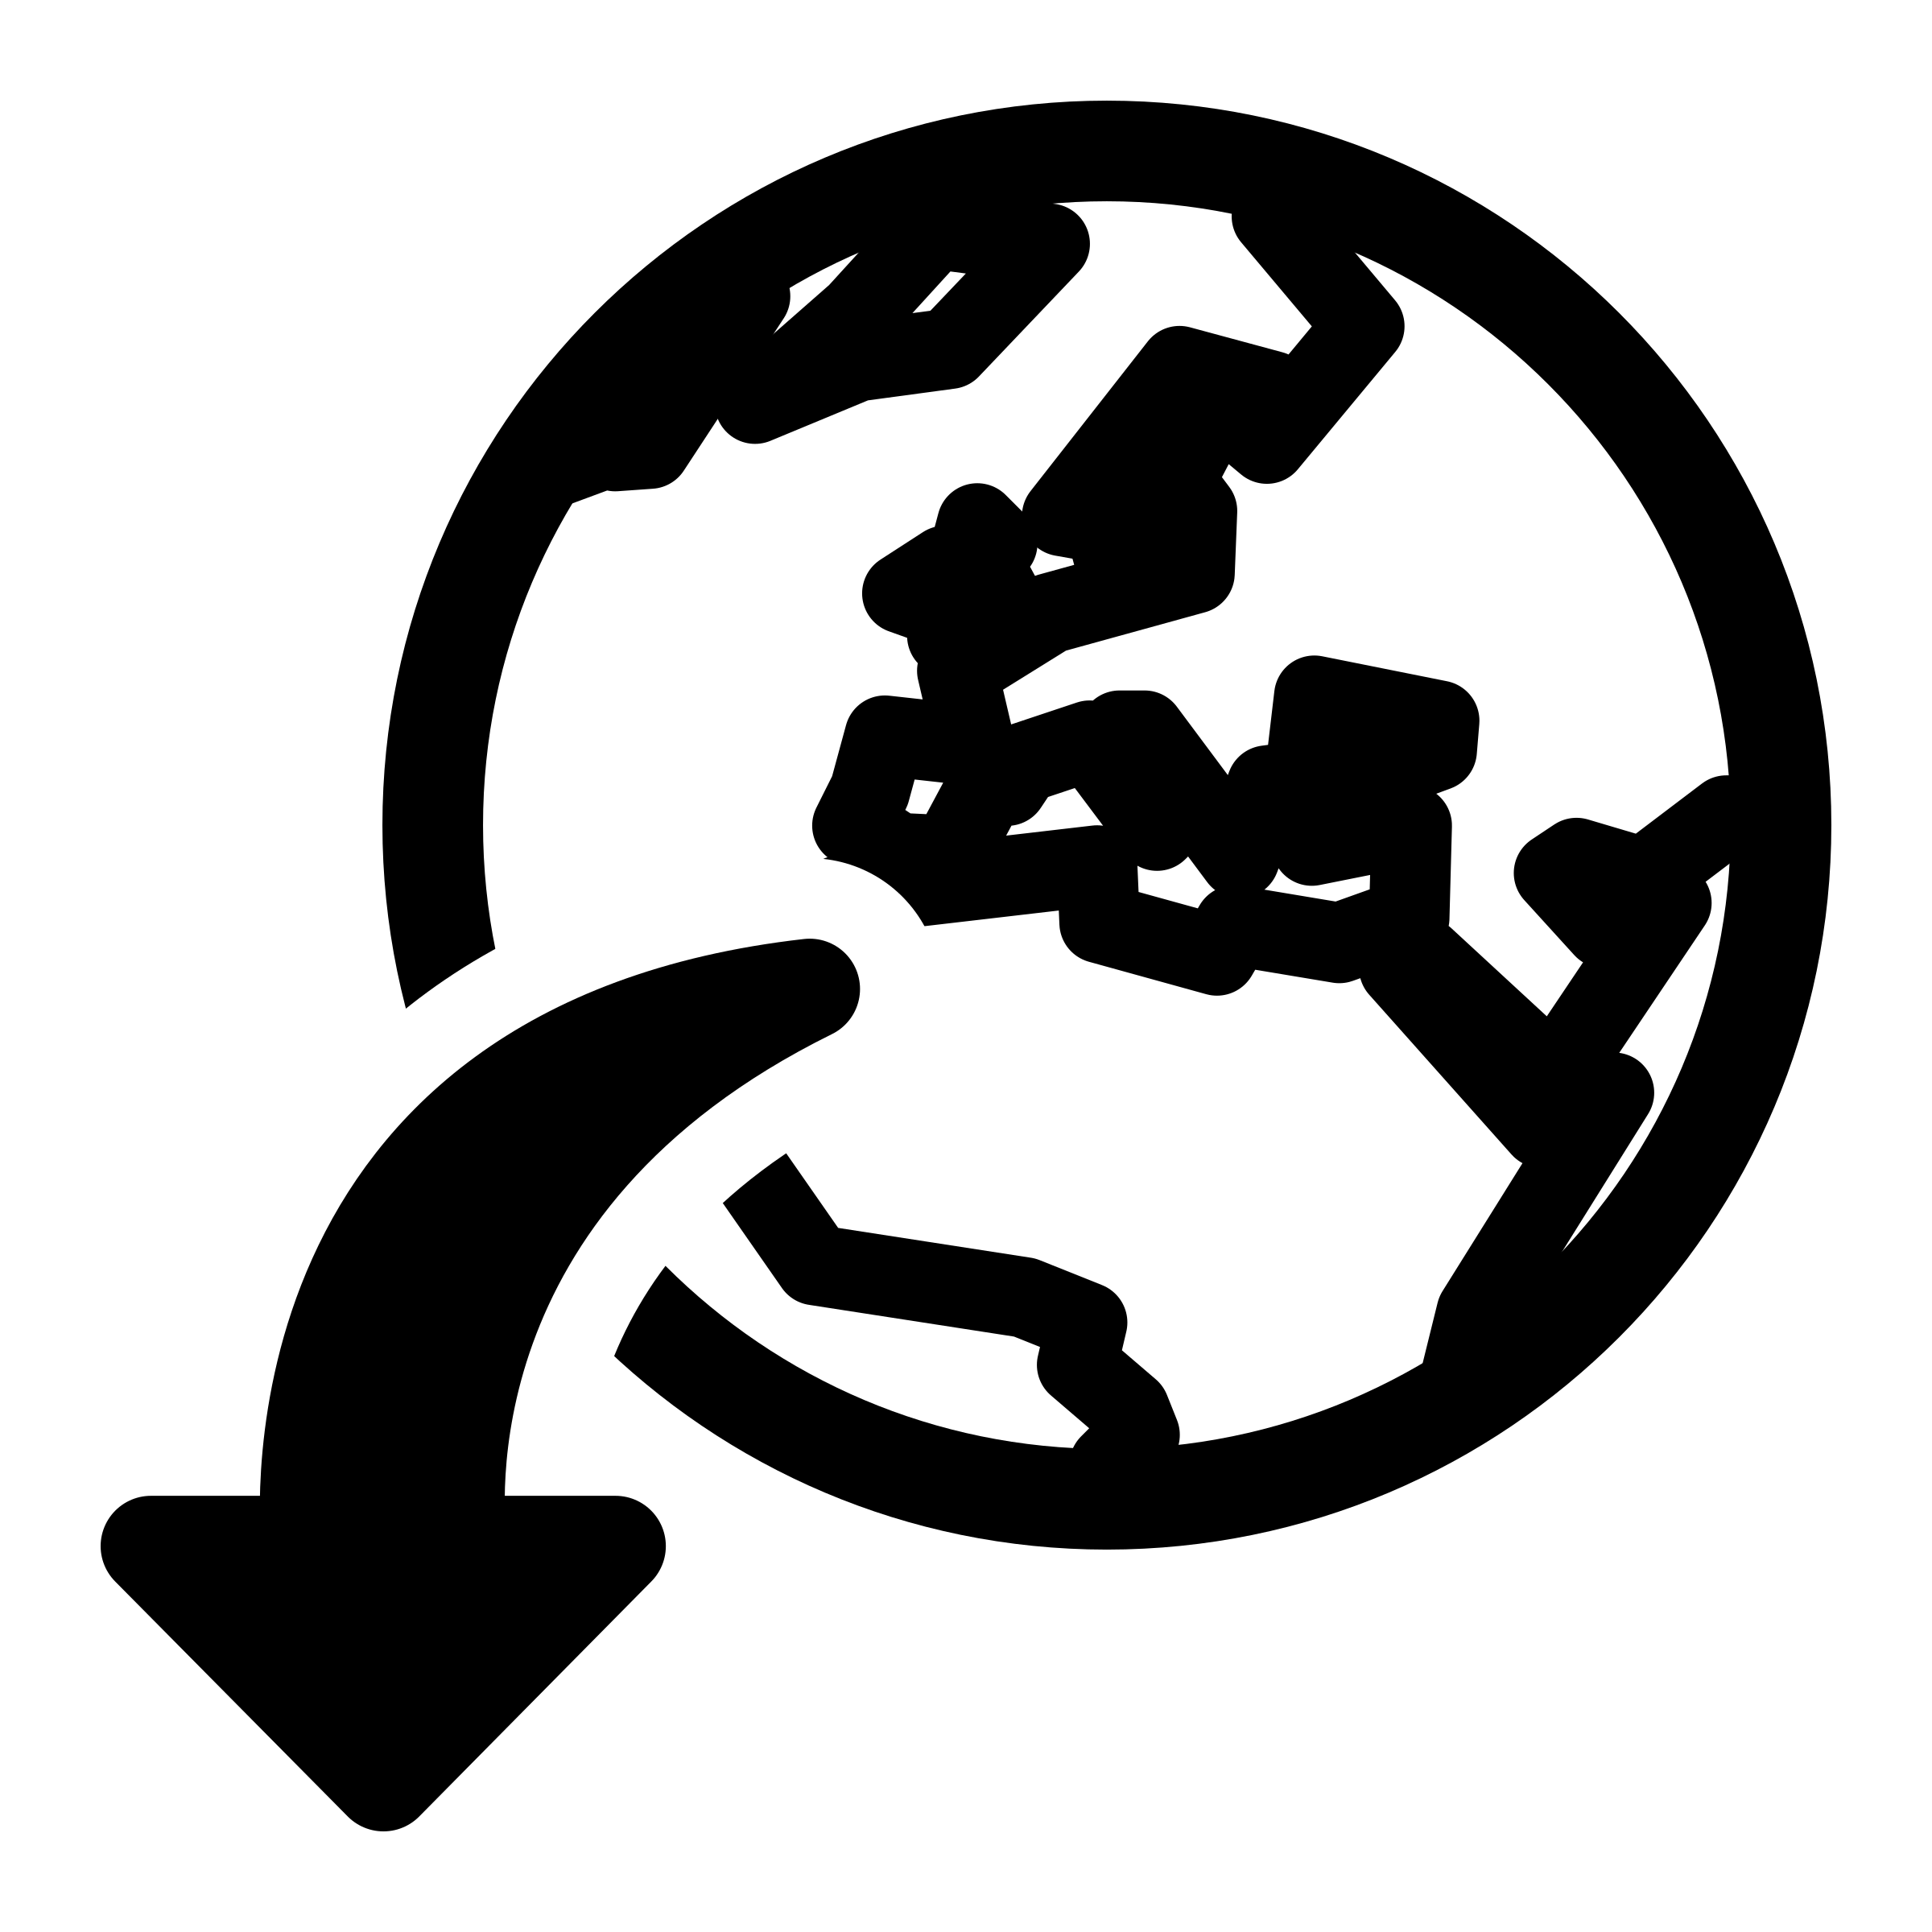 manager clipart symbol